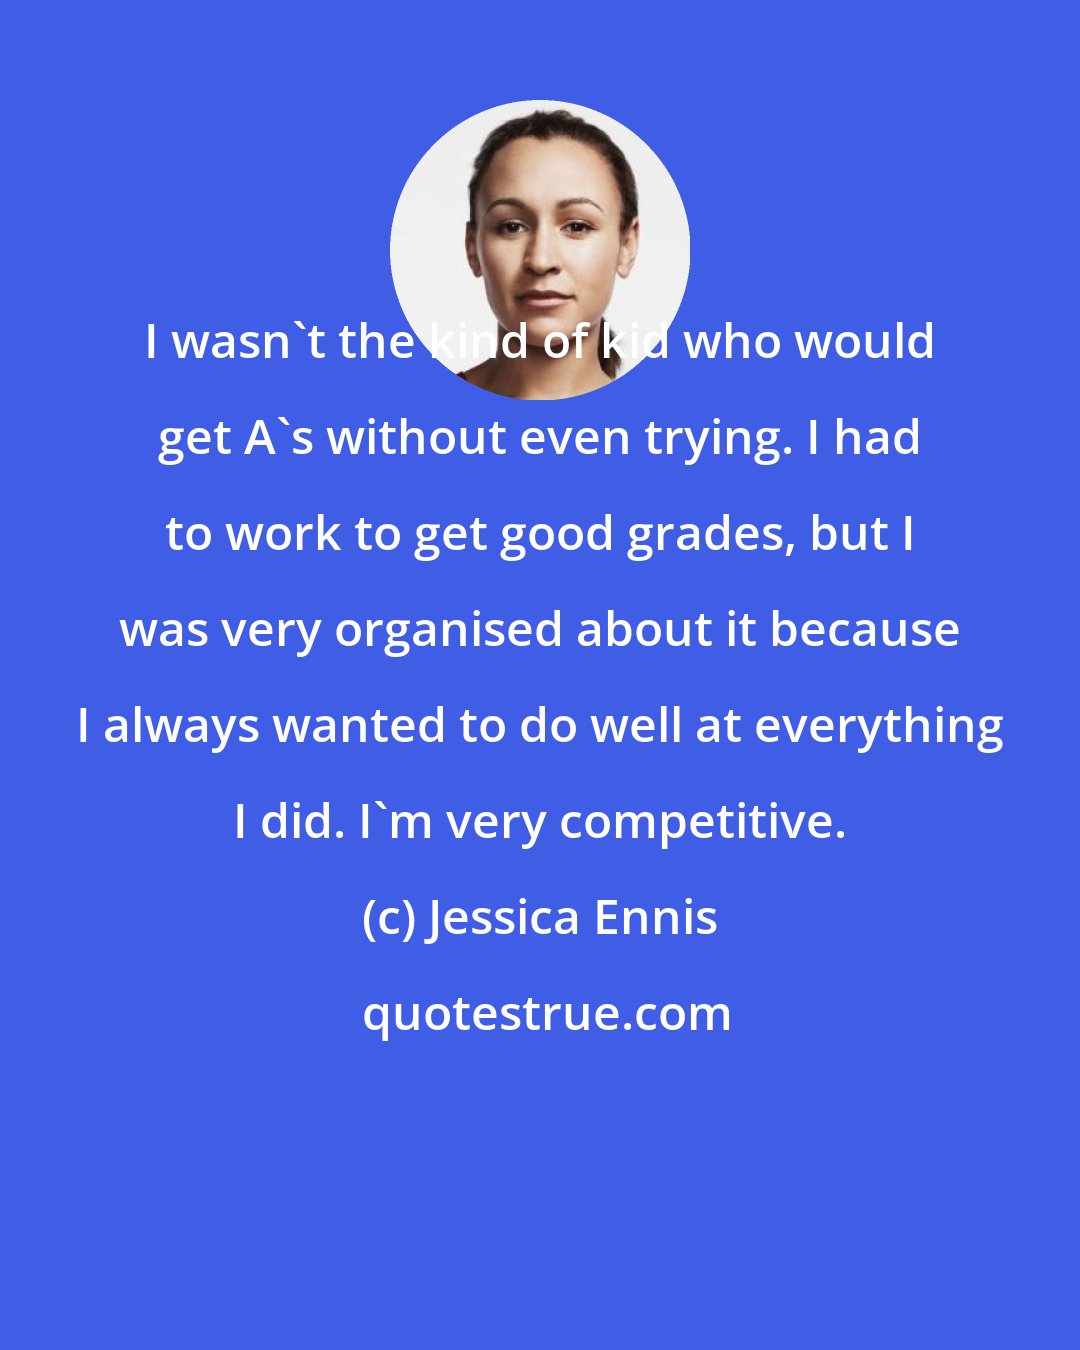 Jessica Ennis: I wasn't the kind of kid who would get A's without even trying. I had to work to get good grades, but I was very organised about it because I always wanted to do well at everything I did. I'm very competitive.